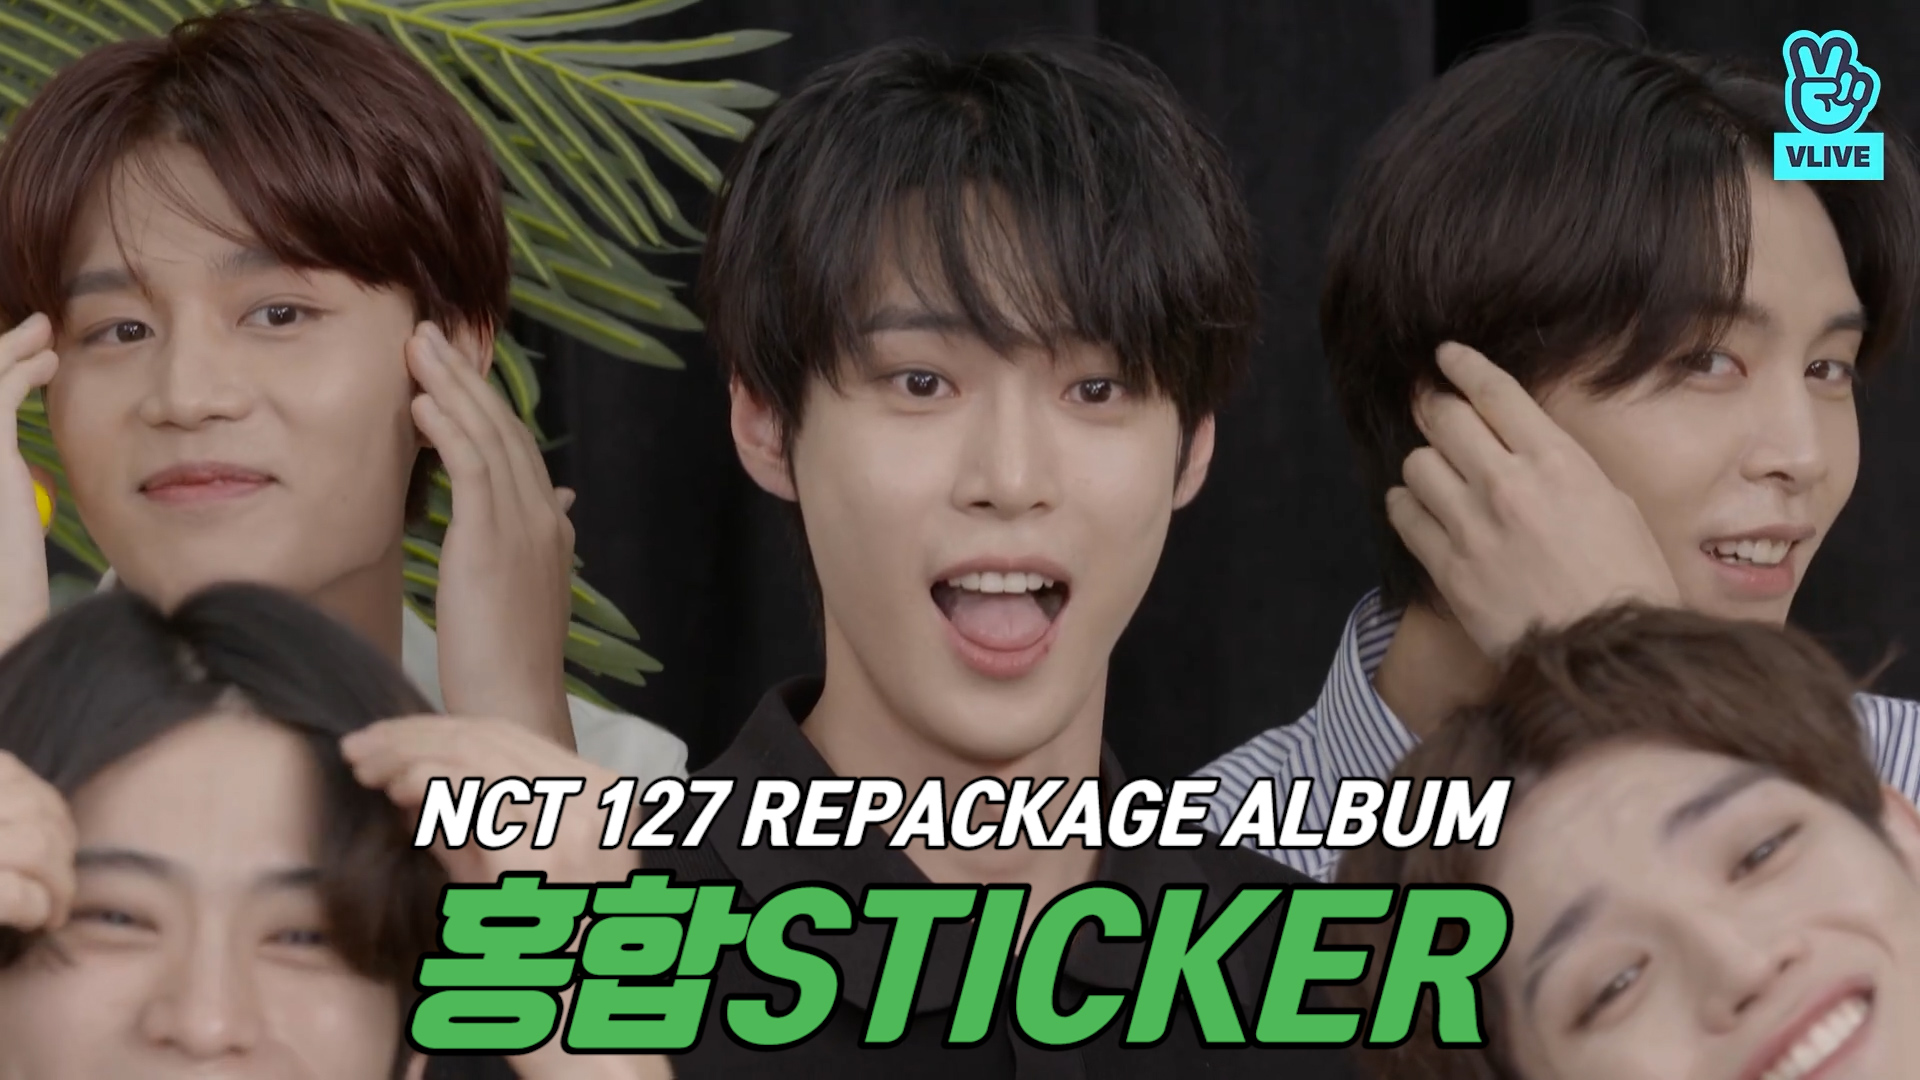 [NCT] 홍합.. 아니 일이칠 꽉 붙잡고 같이 가보자고 (NCT 127’s spoiler about their new album)